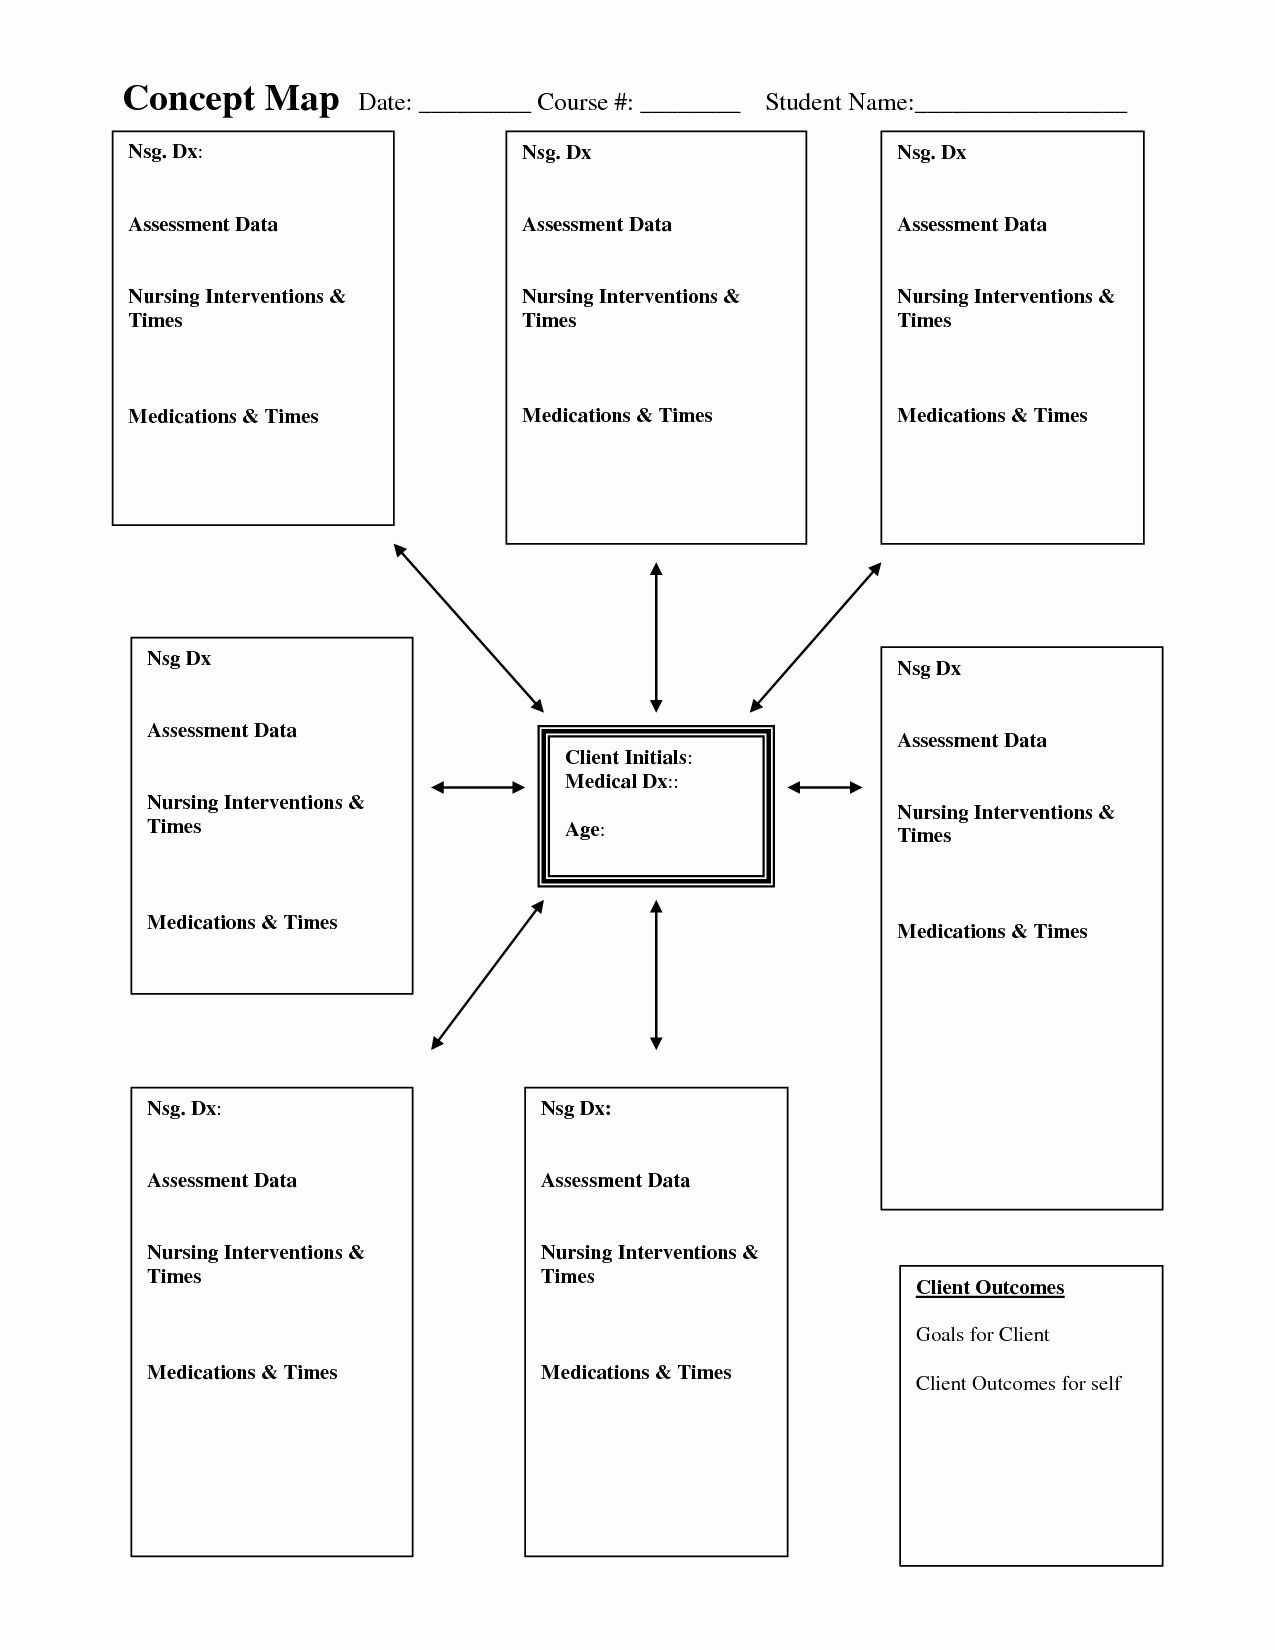 40 Concept Map Template Word In 2020 Concept Map 